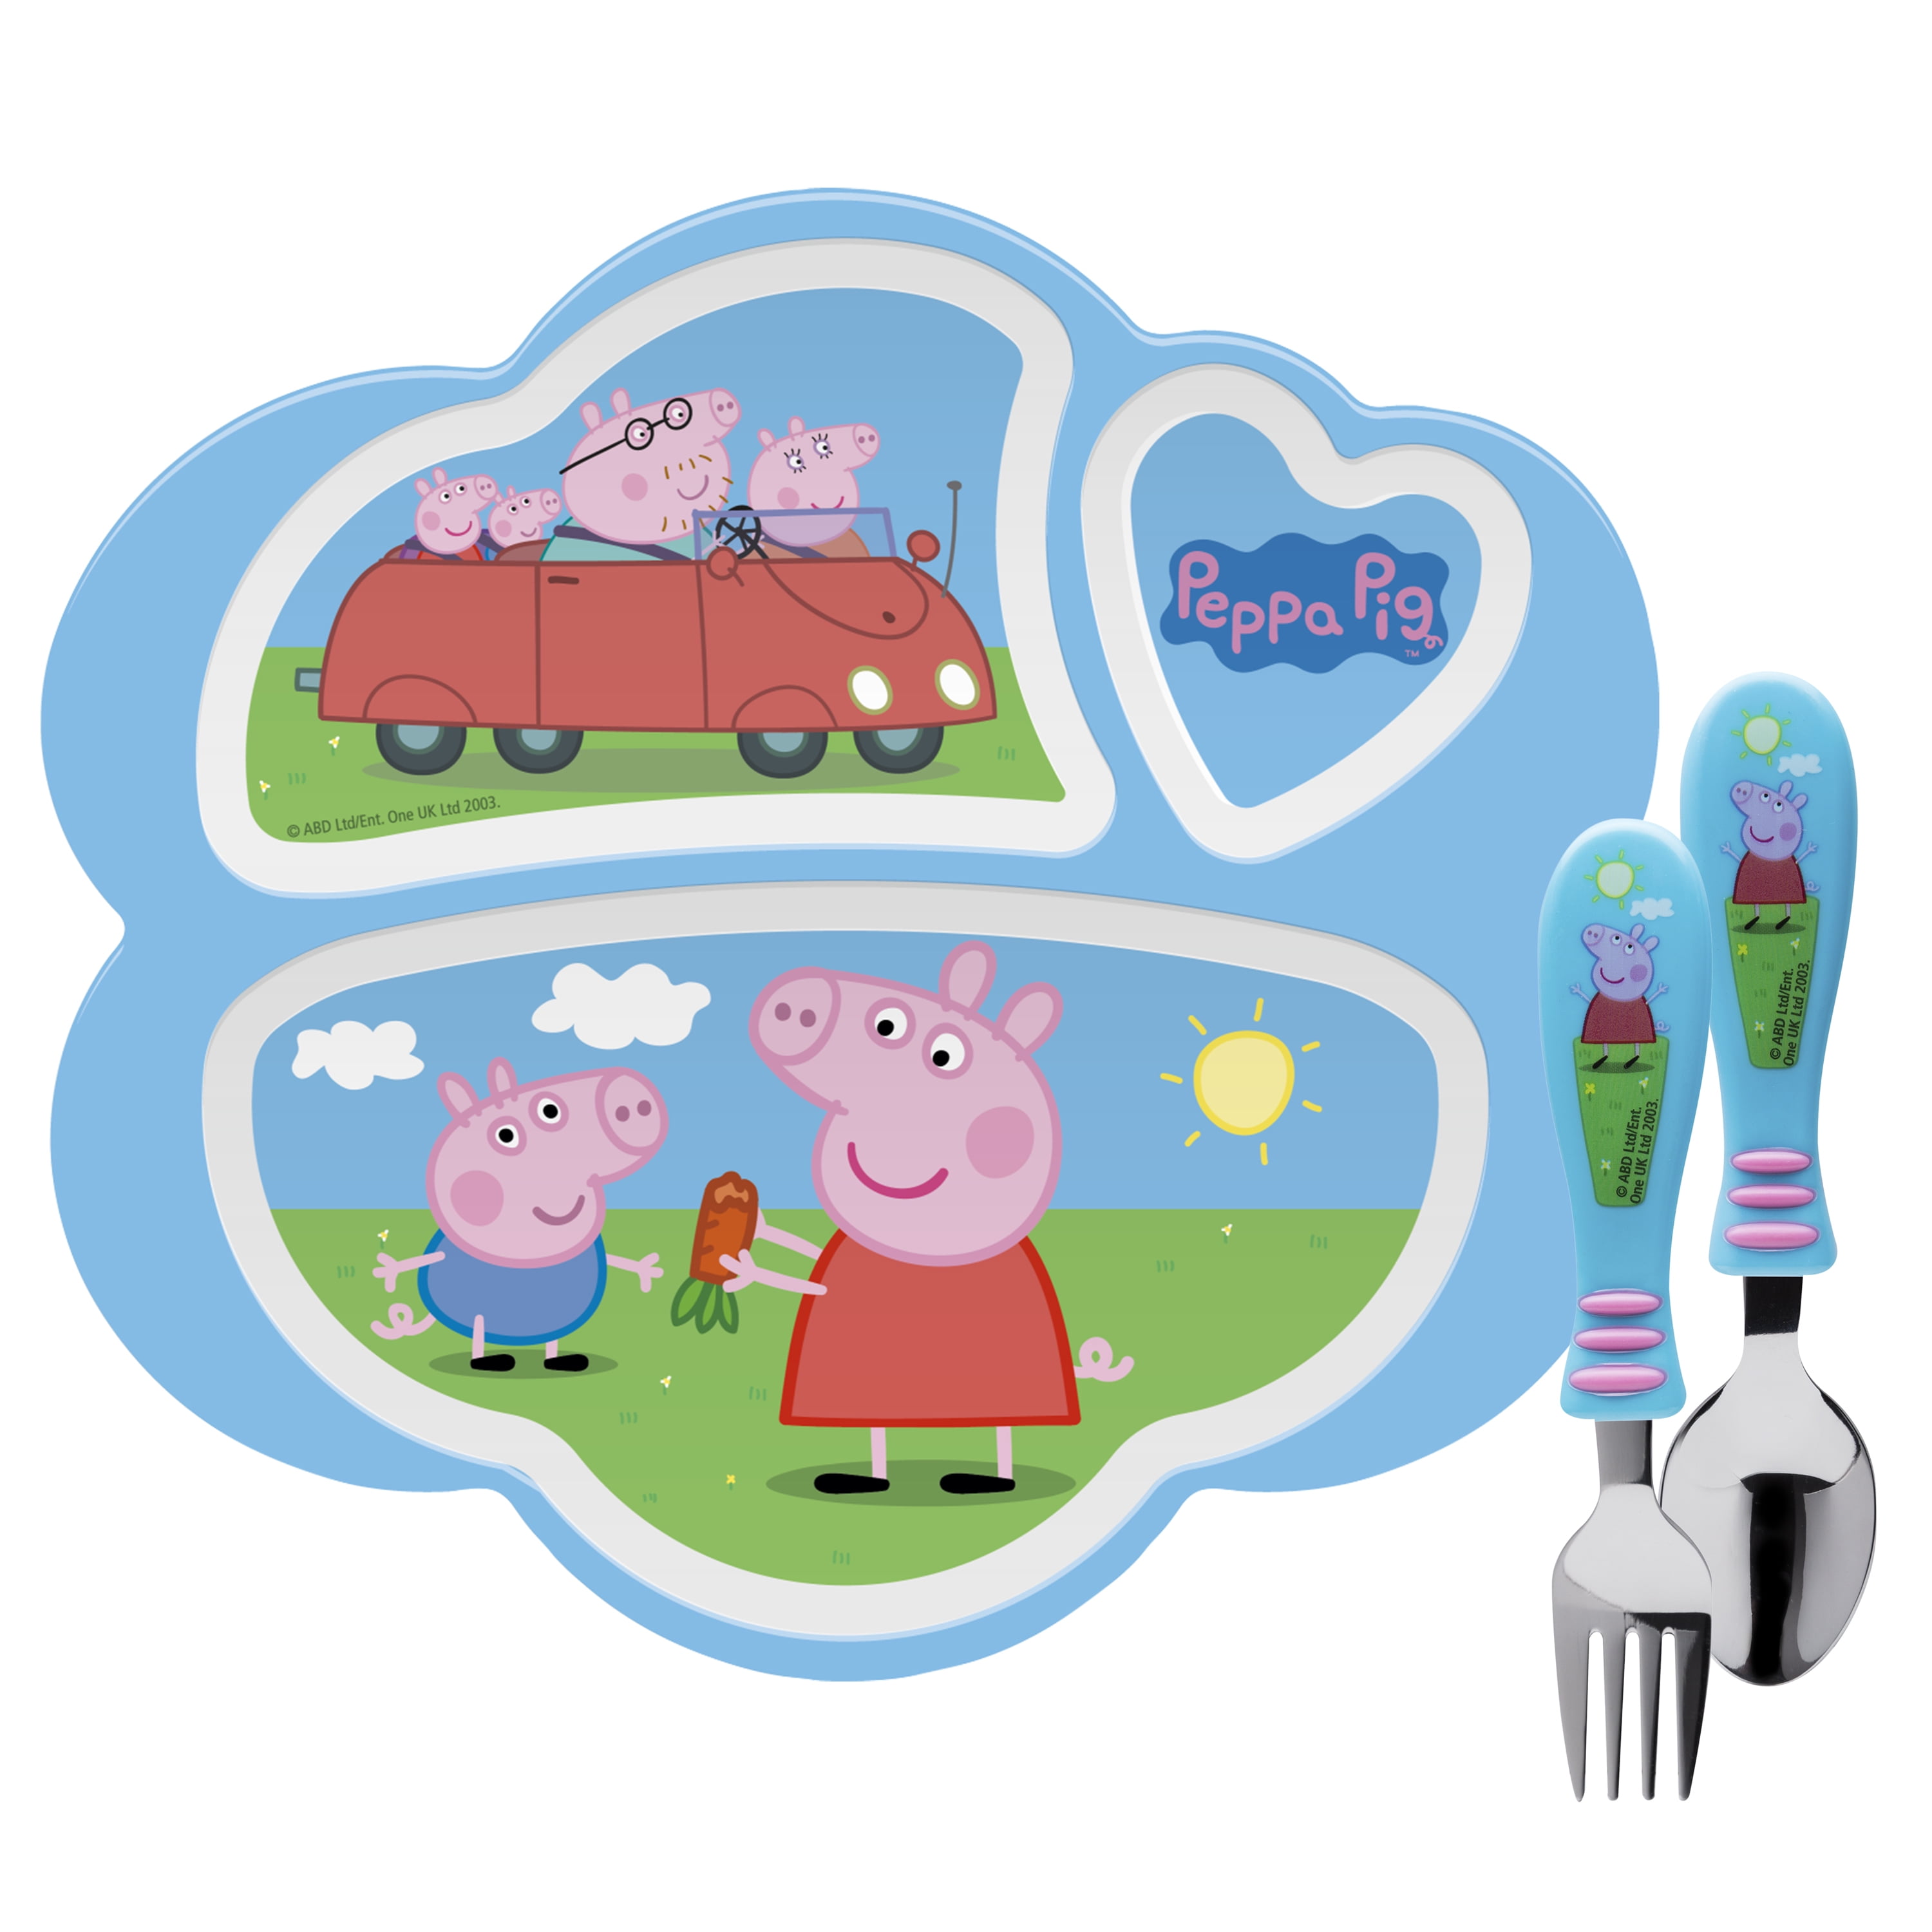 Peppa Pig Children's Plastic Cutlery Set with Pink Spoon and Fork for Kids NEW 